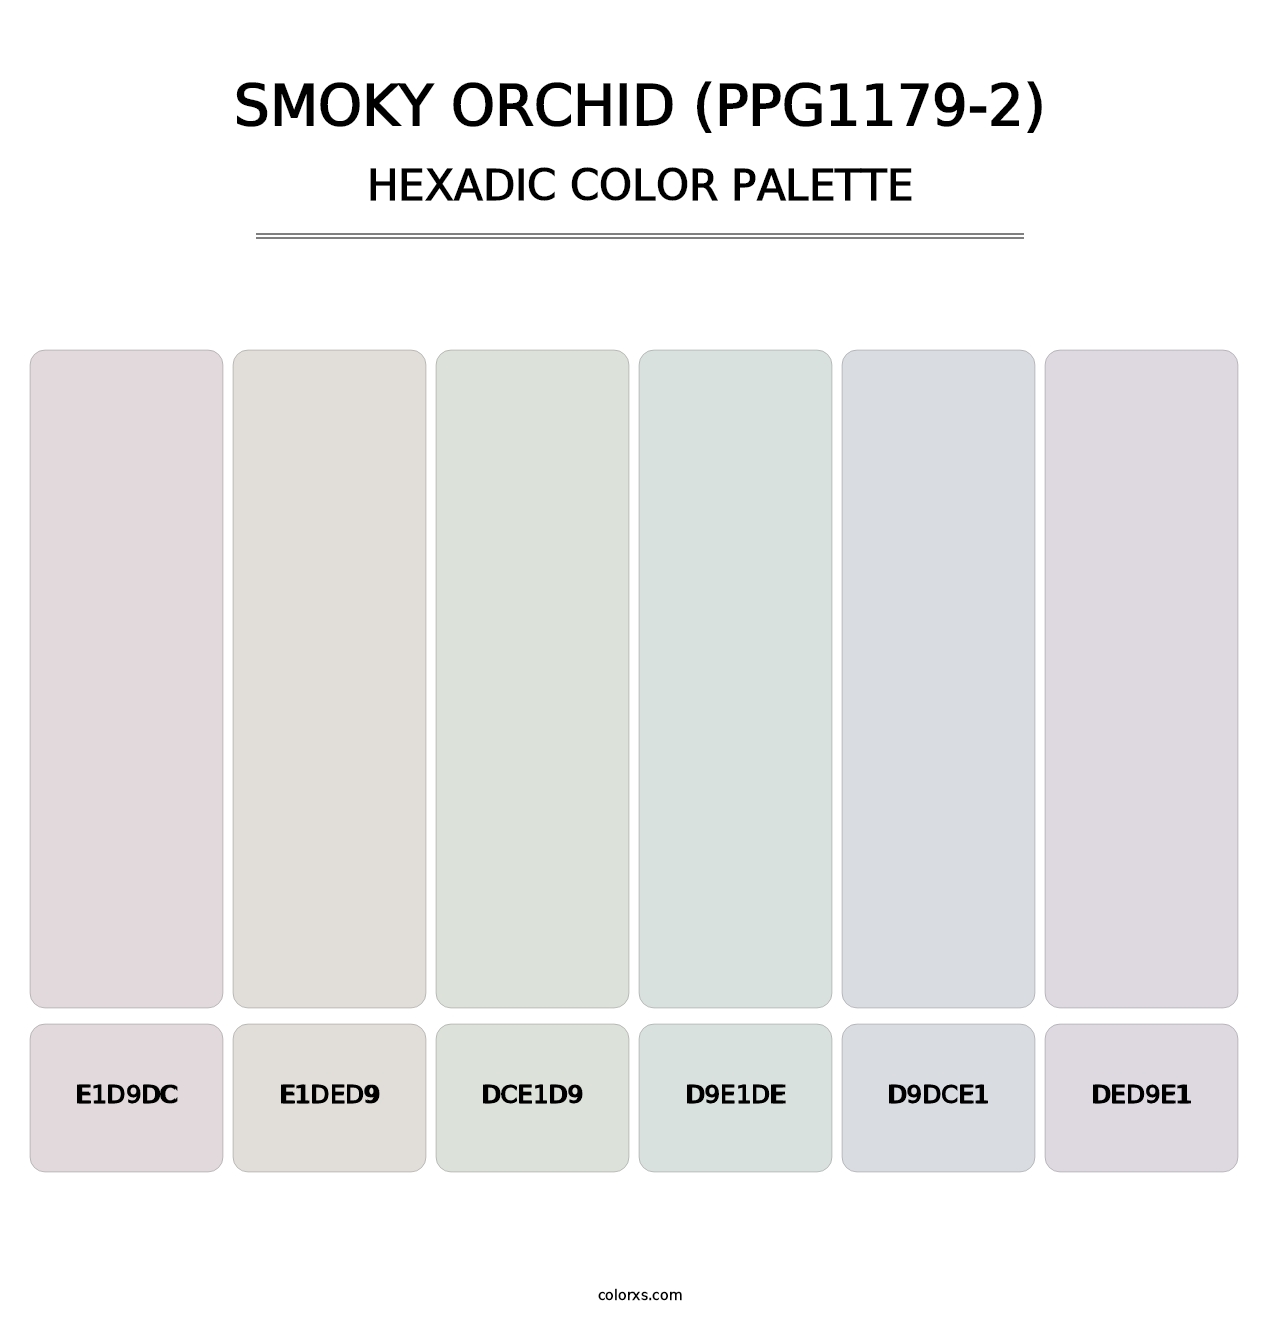 Smoky Orchid (PPG1179-2) - Hexadic Color Palette